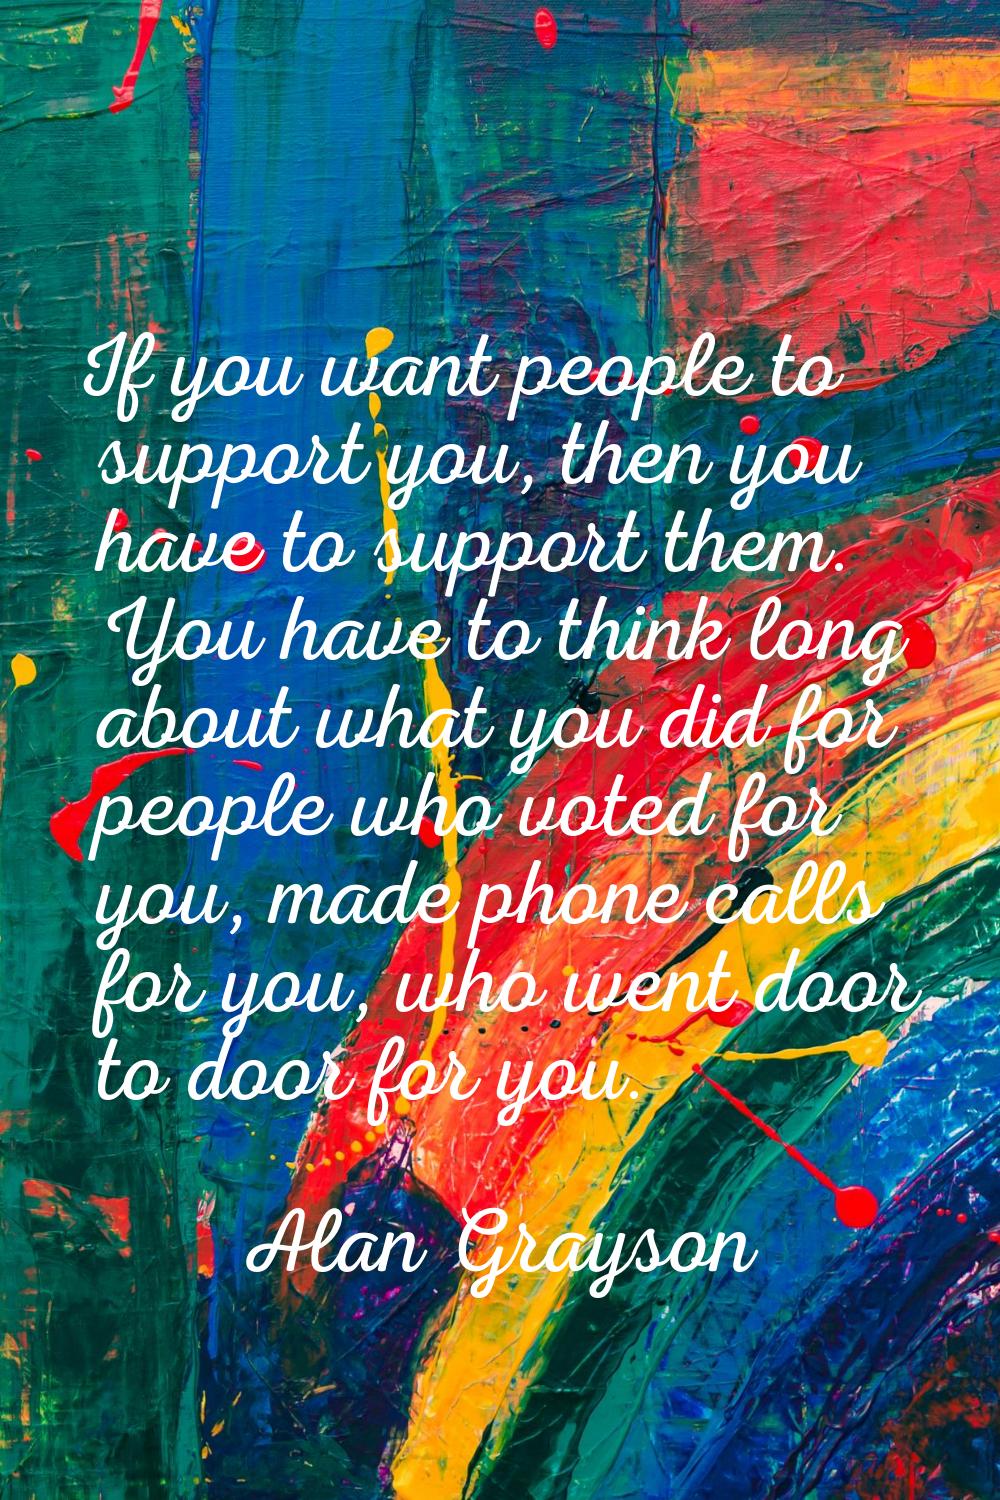 If you want people to support you, then you have to support them. You have to think long about what